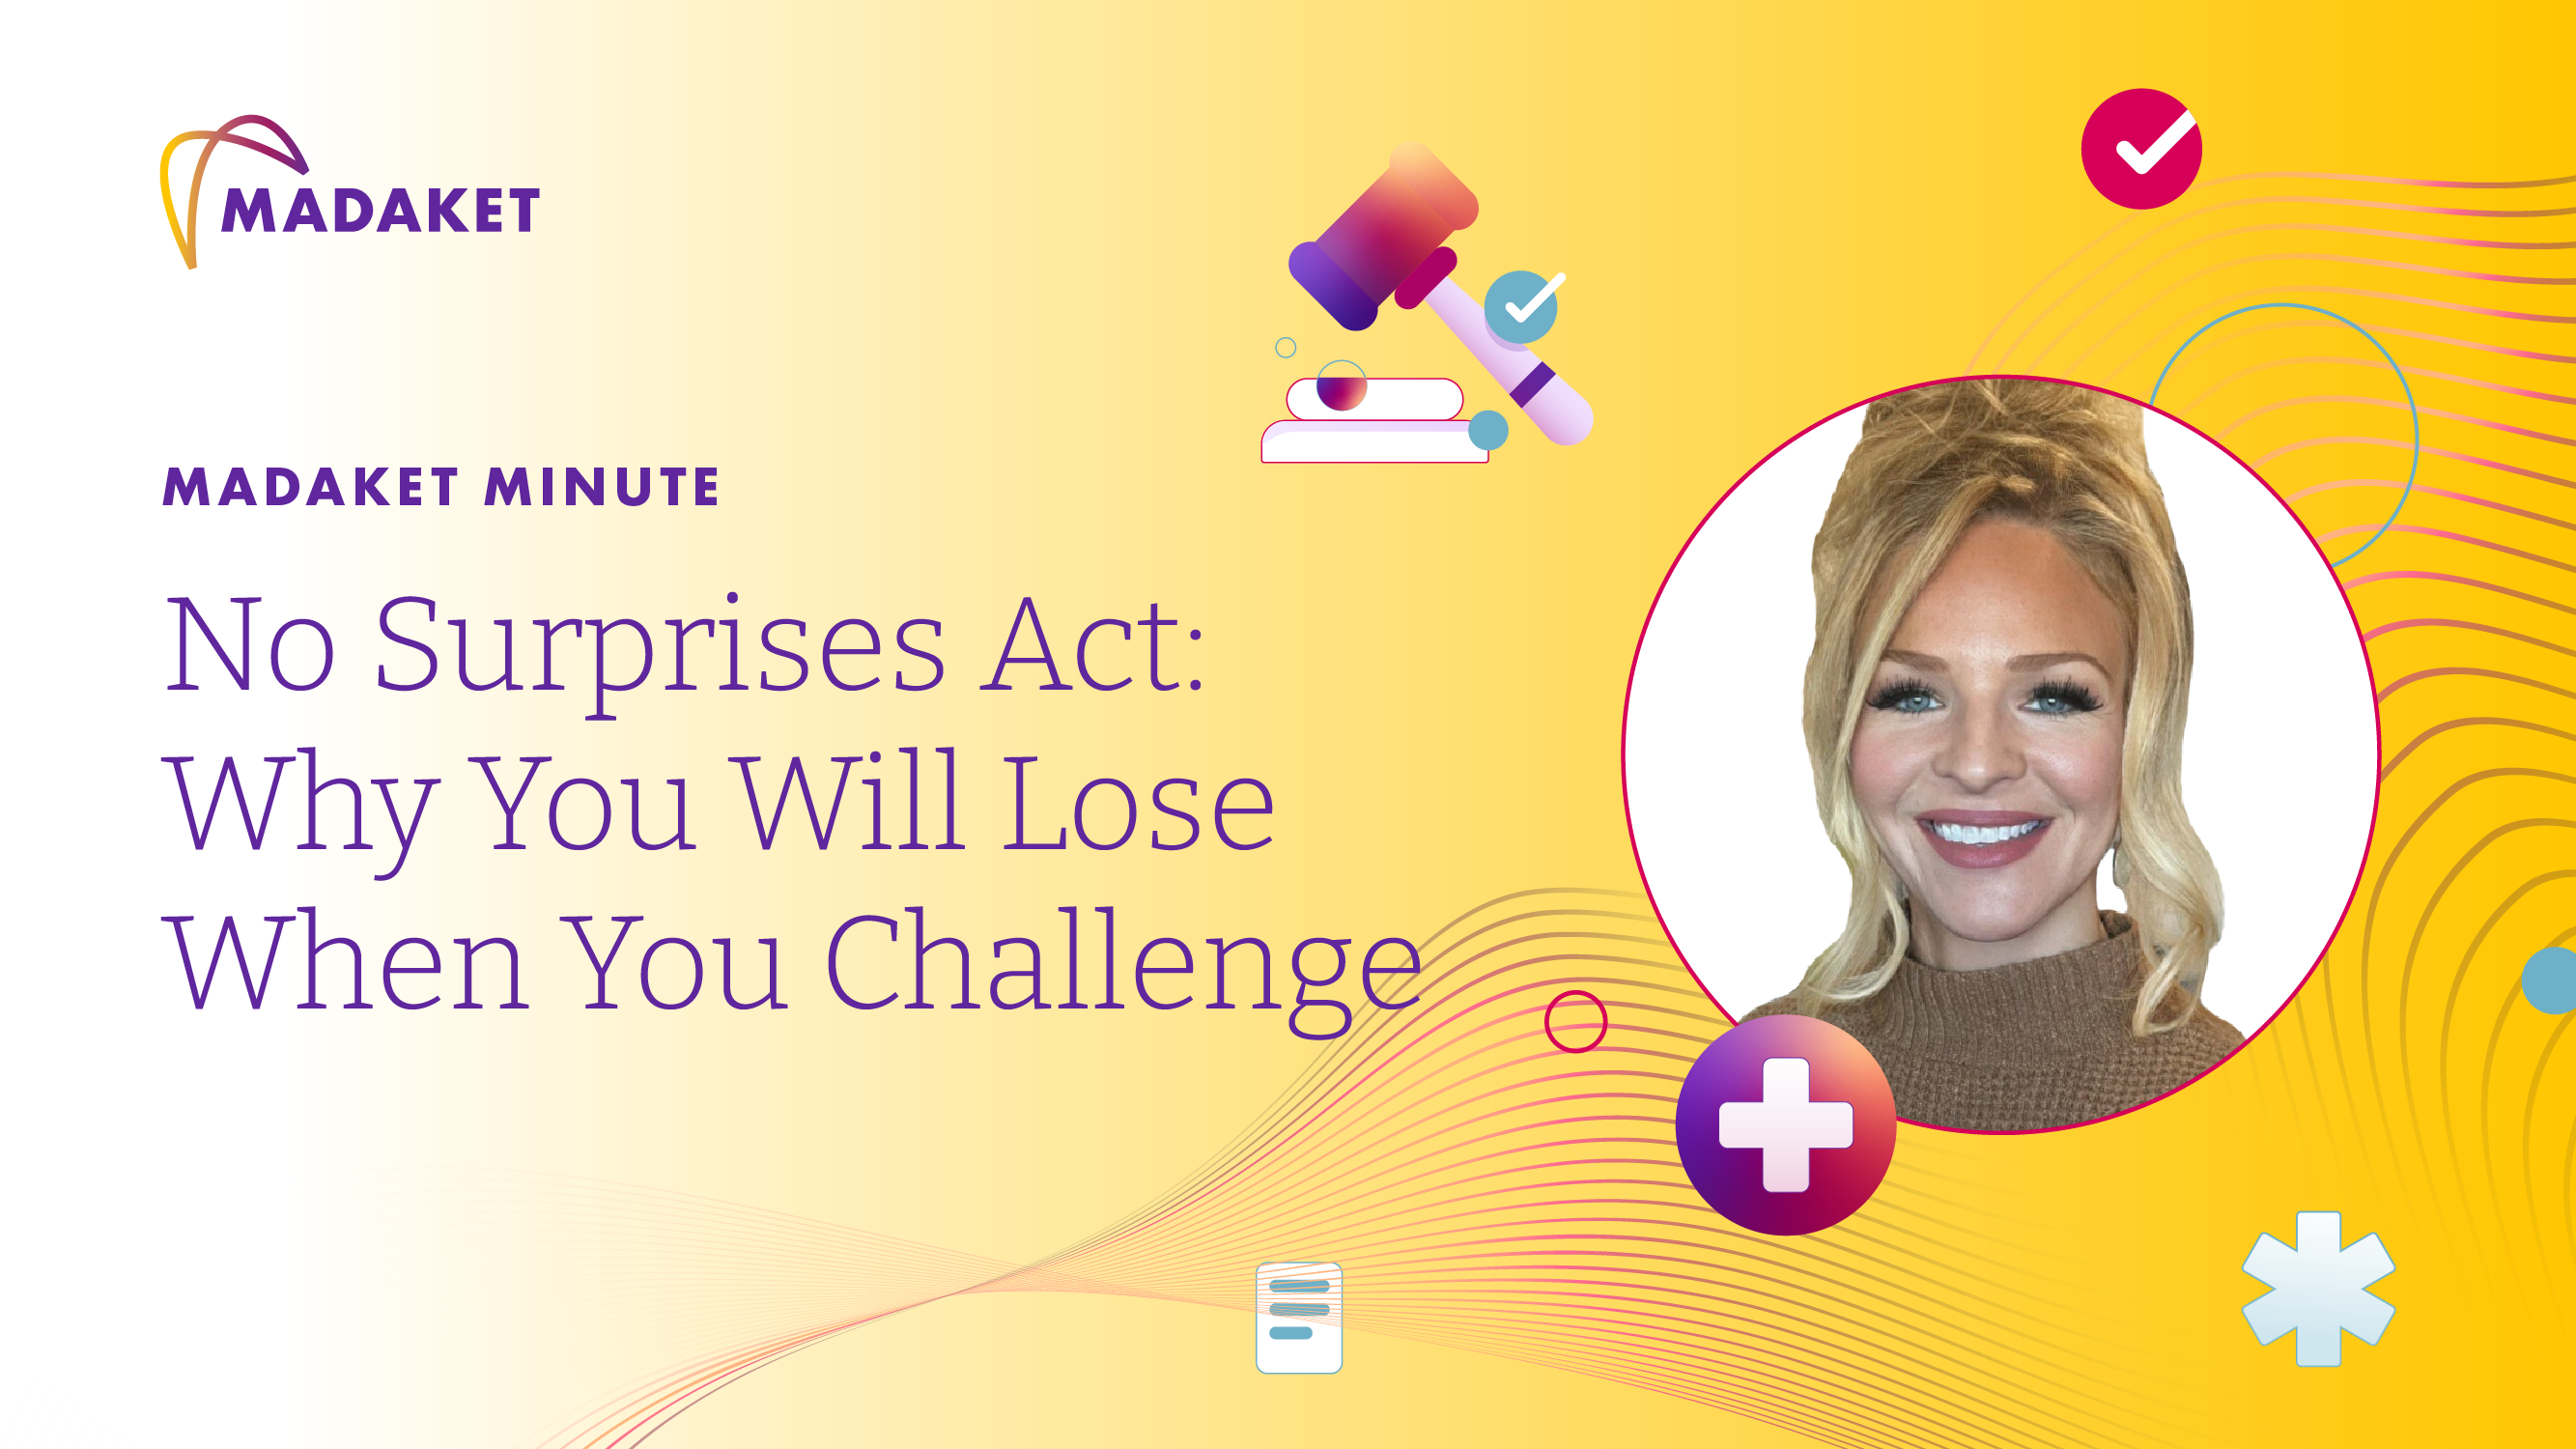 No Surprises Act - Why You Will Lose When You Challenge